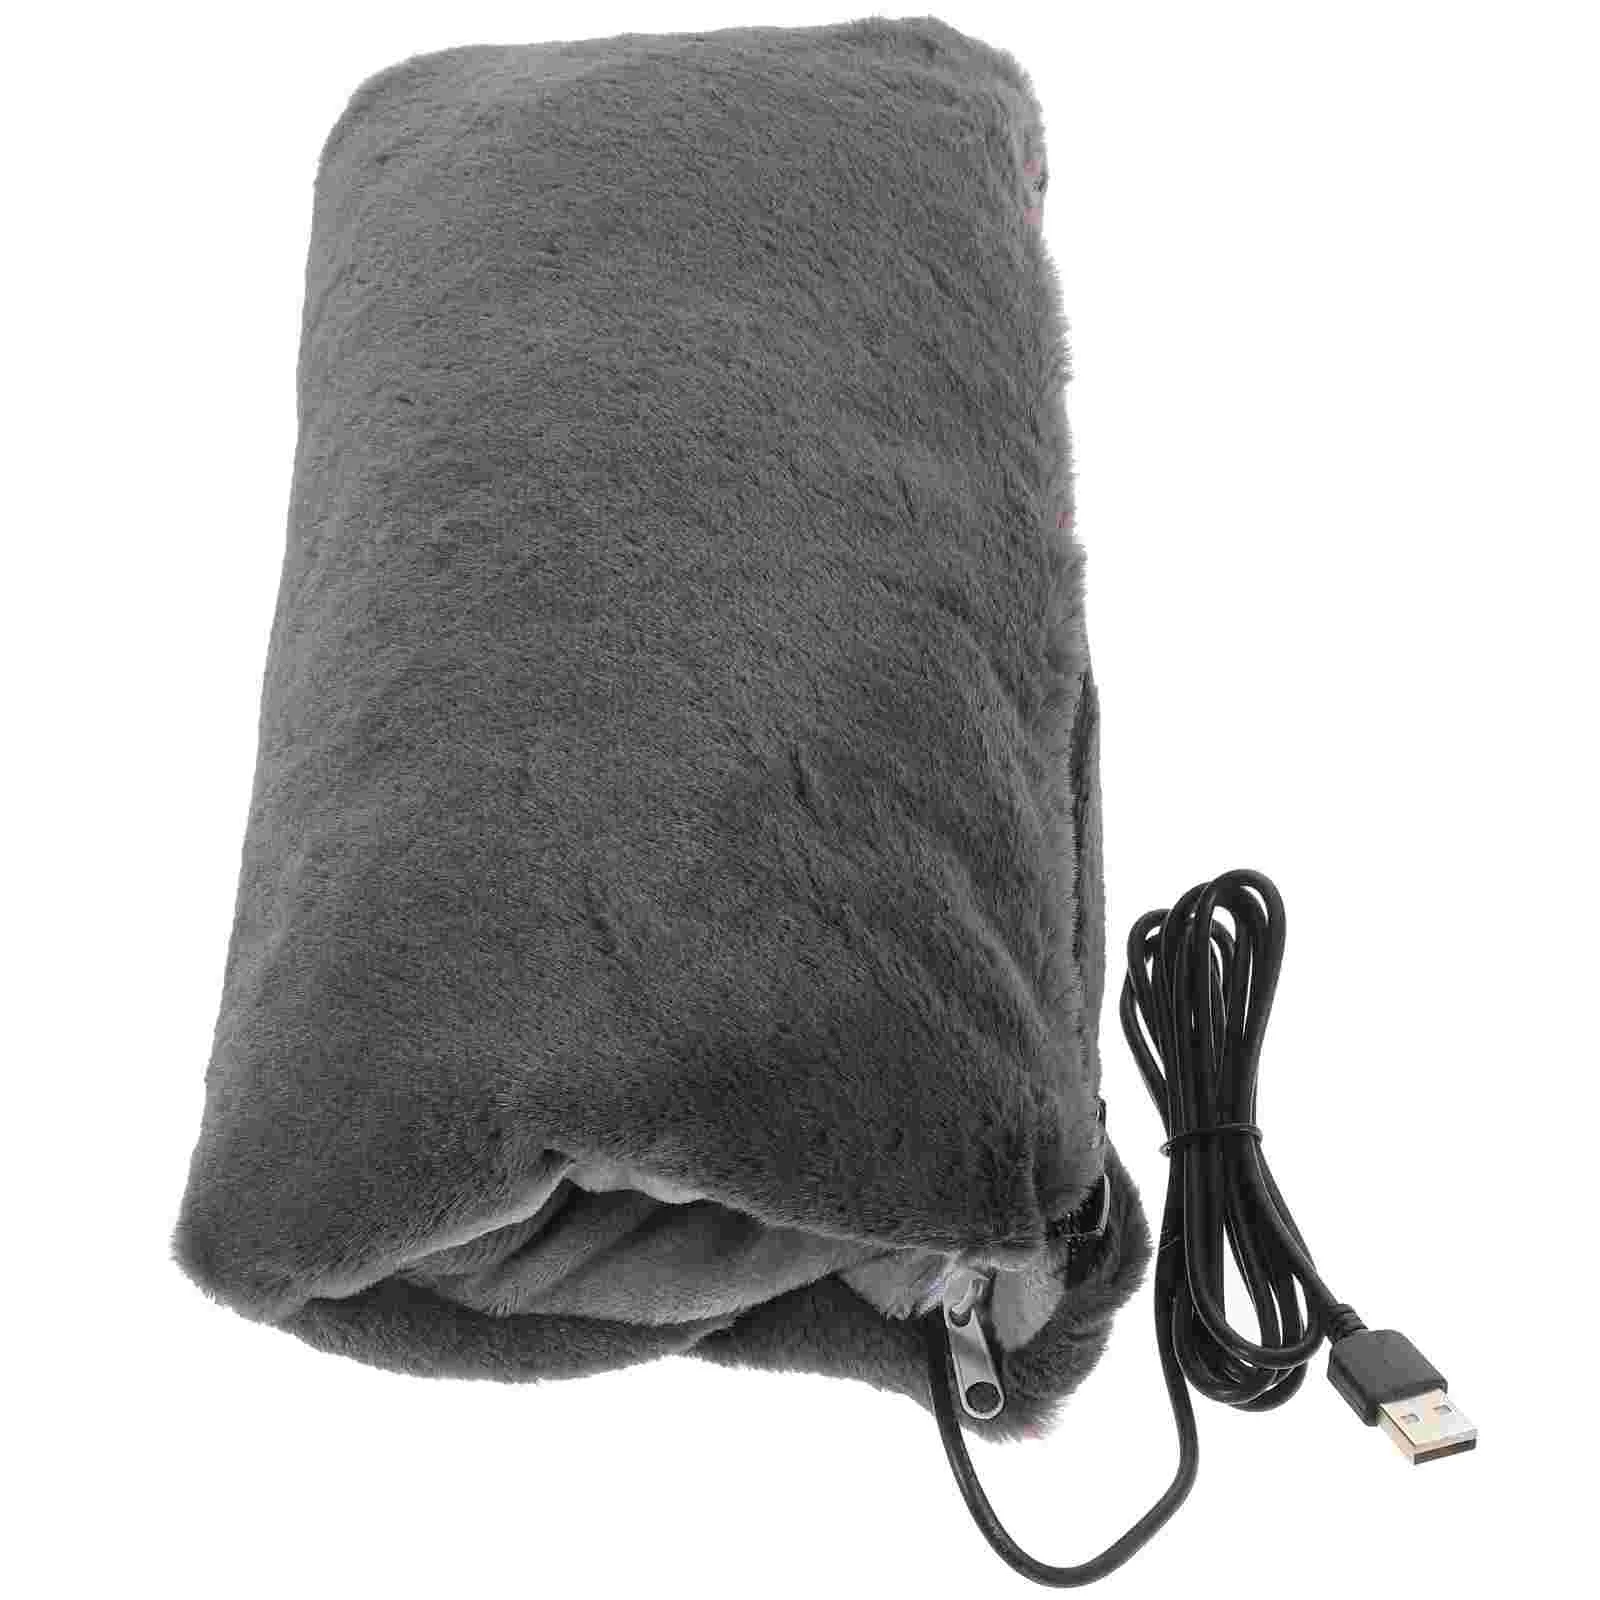 

Hand Warmer Water Usb Hot Electric Bottle Warming Winterpad Rechargeable Plush Heated Pouchheating Treasure Pillow Portable